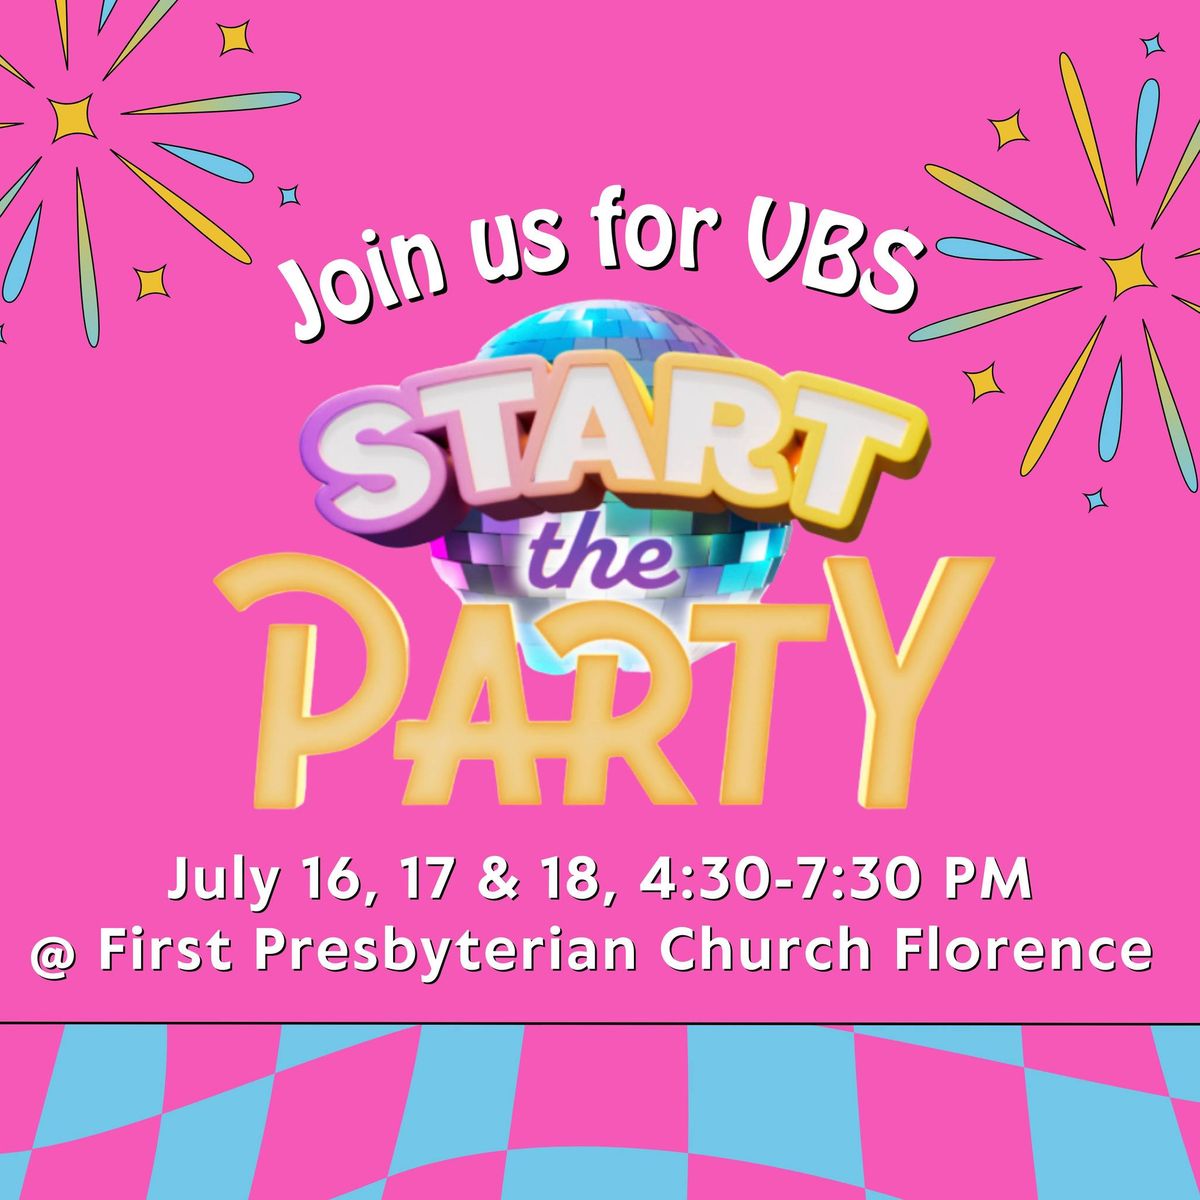 Start the Party! VBS @ First Presbyterian Church Florence, AL